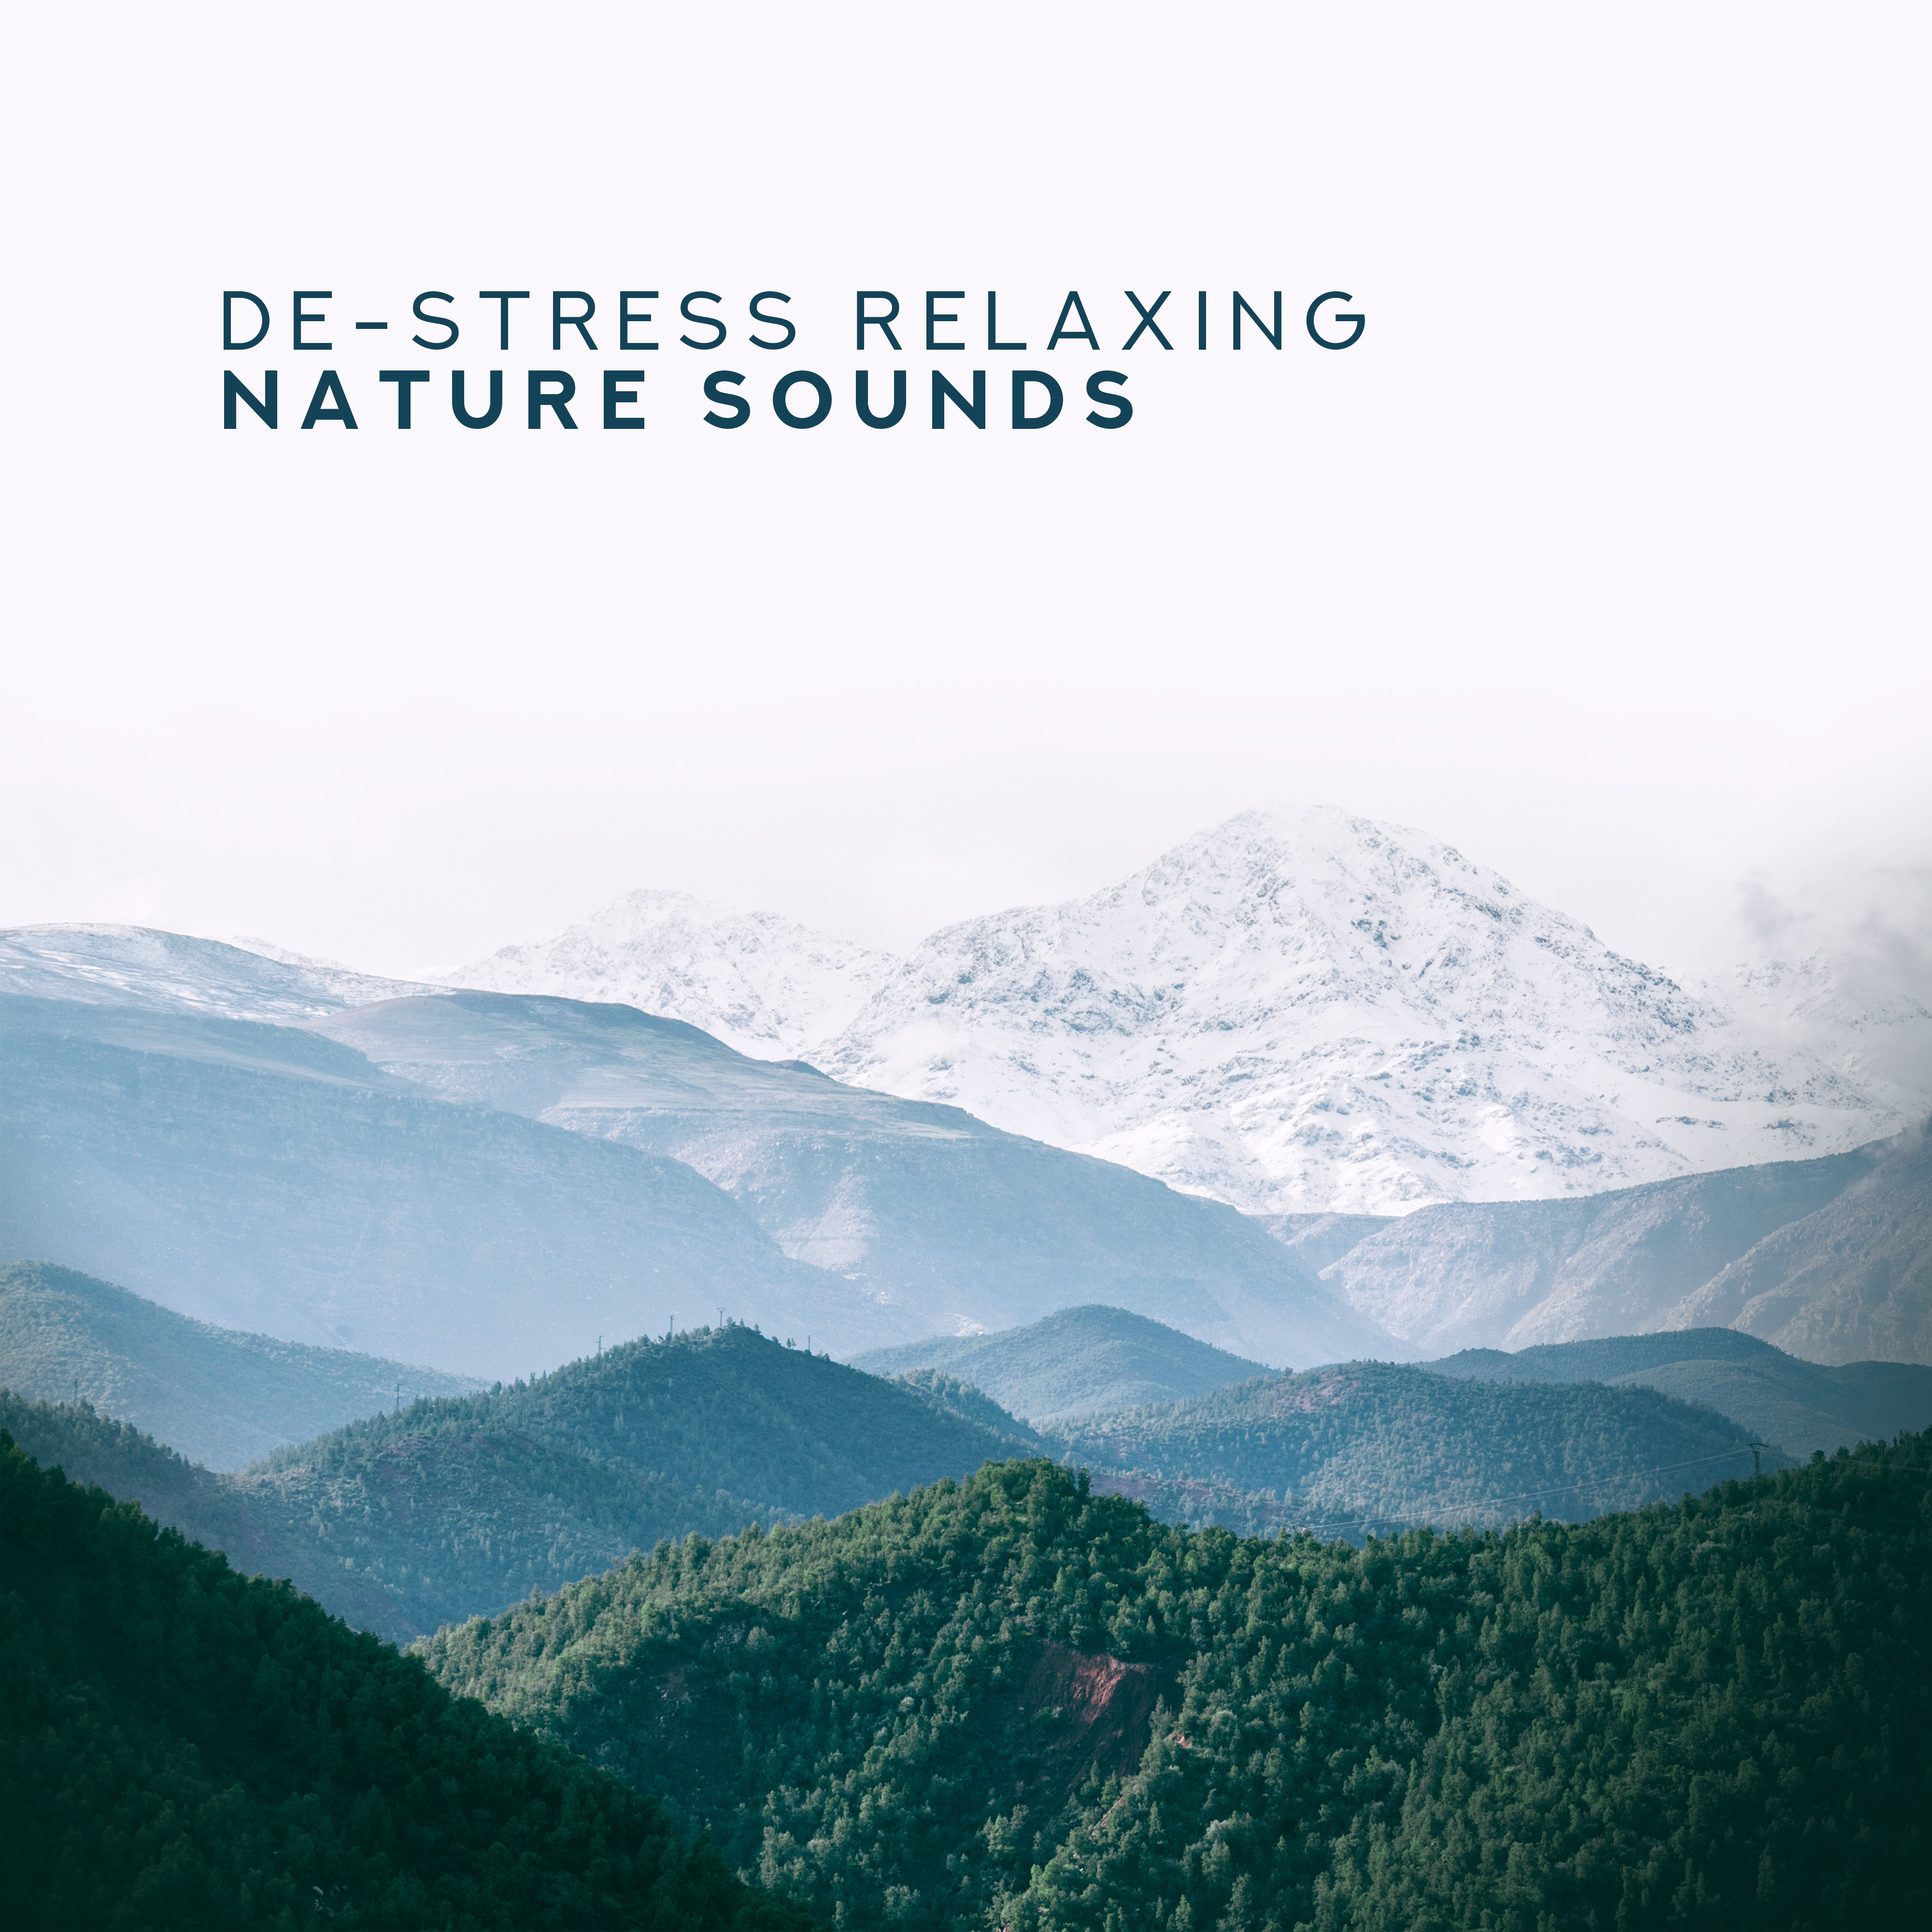 DeStress Relaxing Nature Sounds  New Age Music Compilation for Full Calm Down, Healing Therapy, Stress Relief